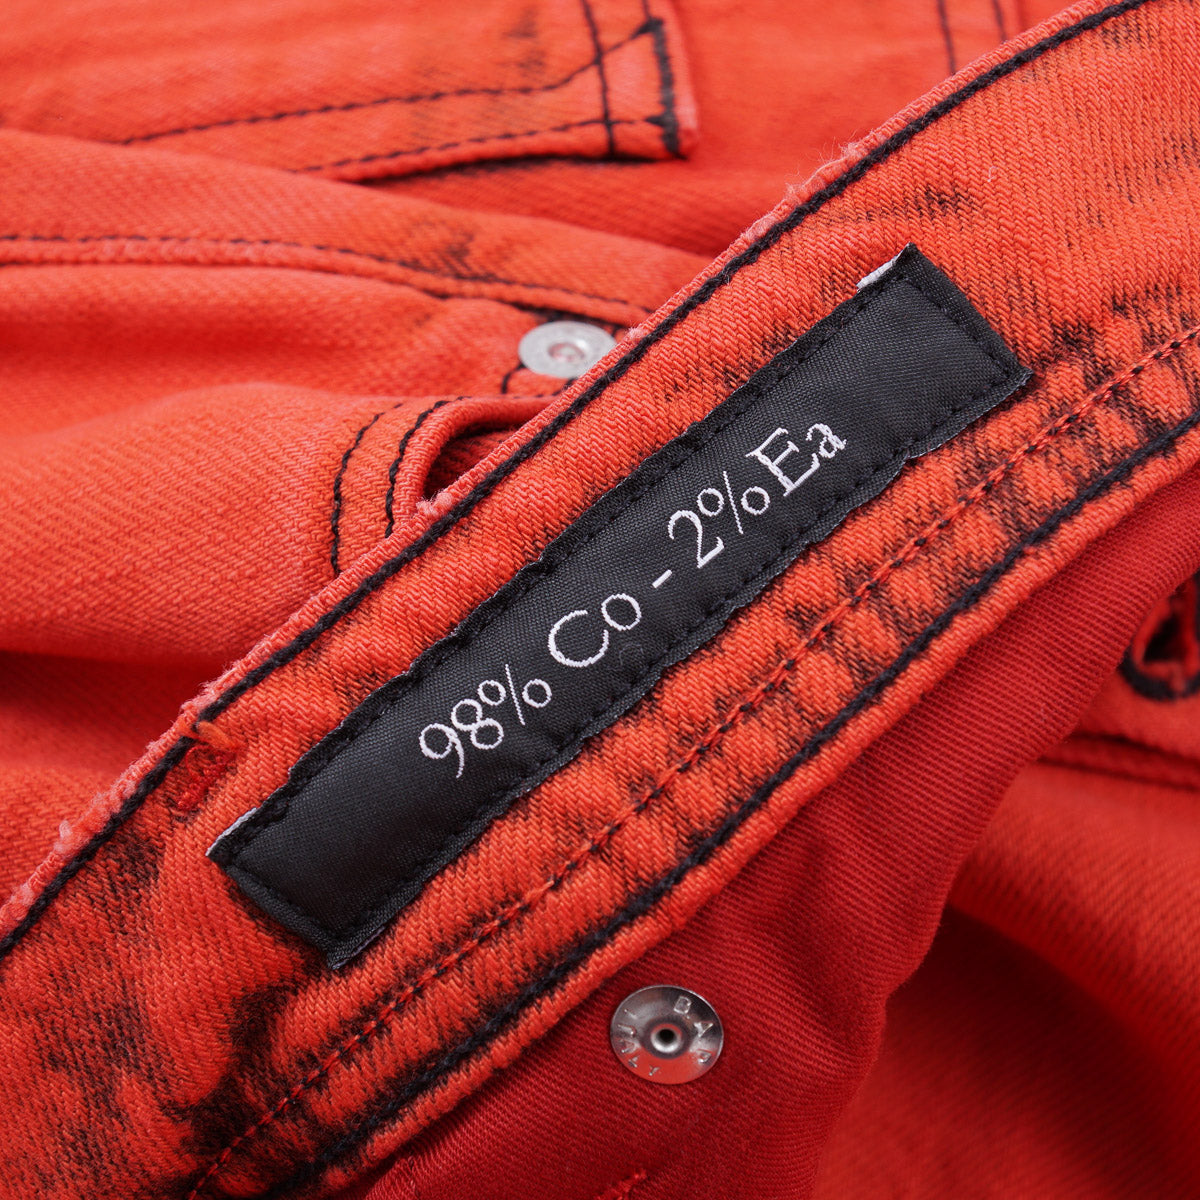 Kiton Special-Edition Overdyed Jeans - Top Shelf Apparel